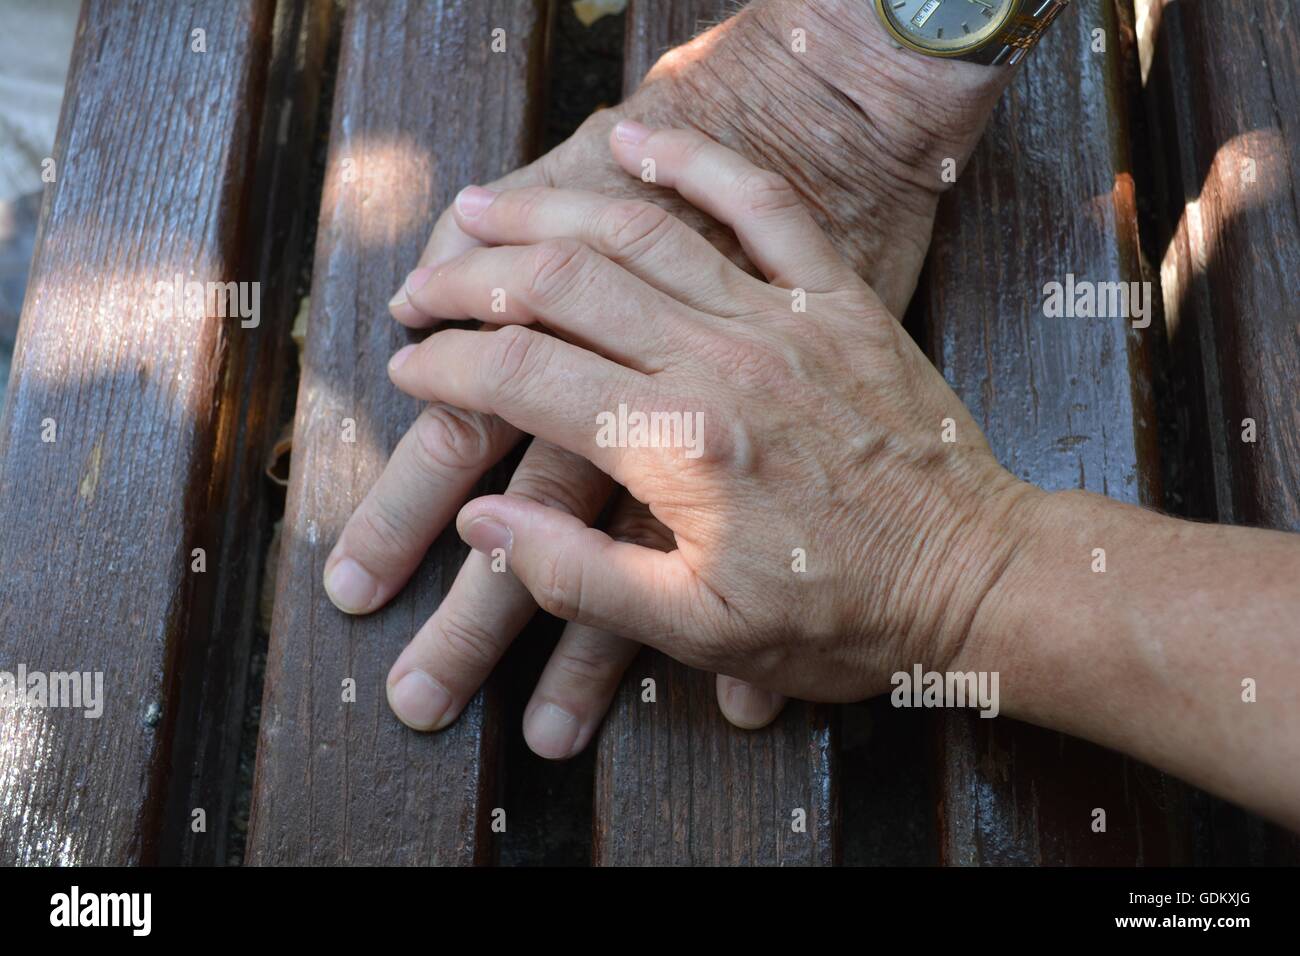 Old and Adult Hands. Hands of a fateher and his daughter on a wooden bench in the street. Stock Photo